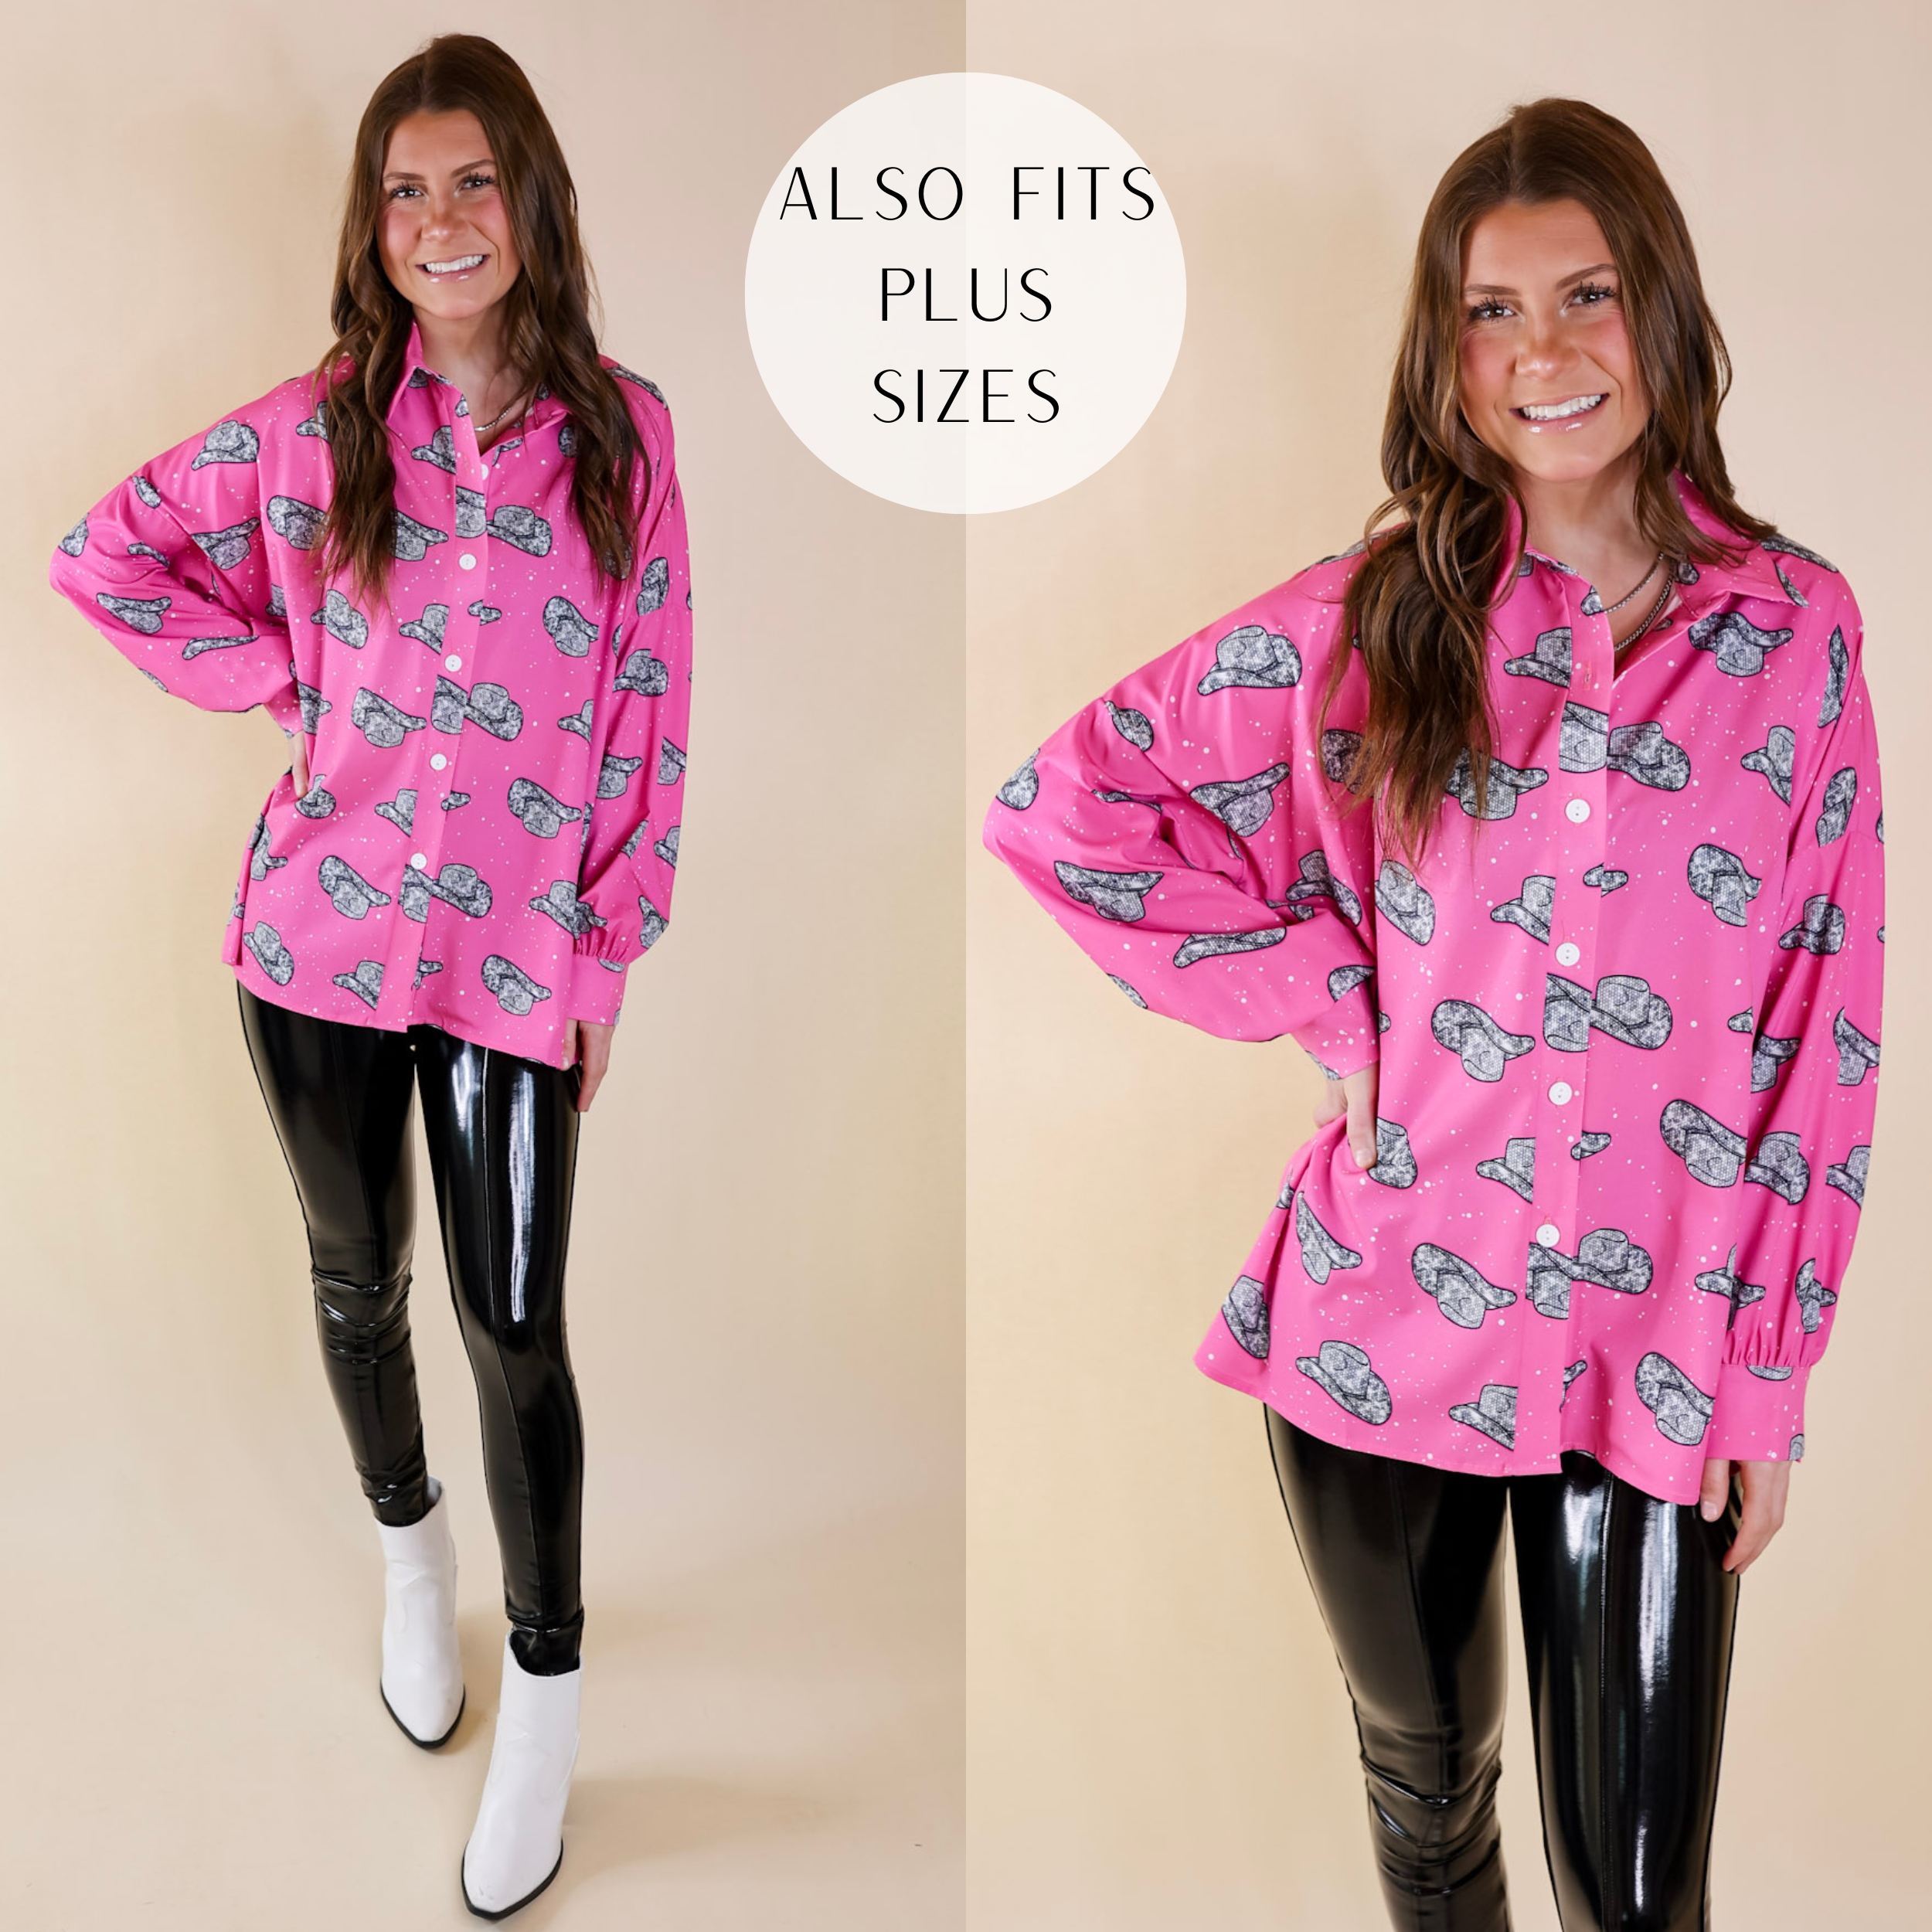 Model is wearing a pink button up top with disco print cowboy hats all over. Model has it paired with faux leather leggings, white booties, and silver jewelry.